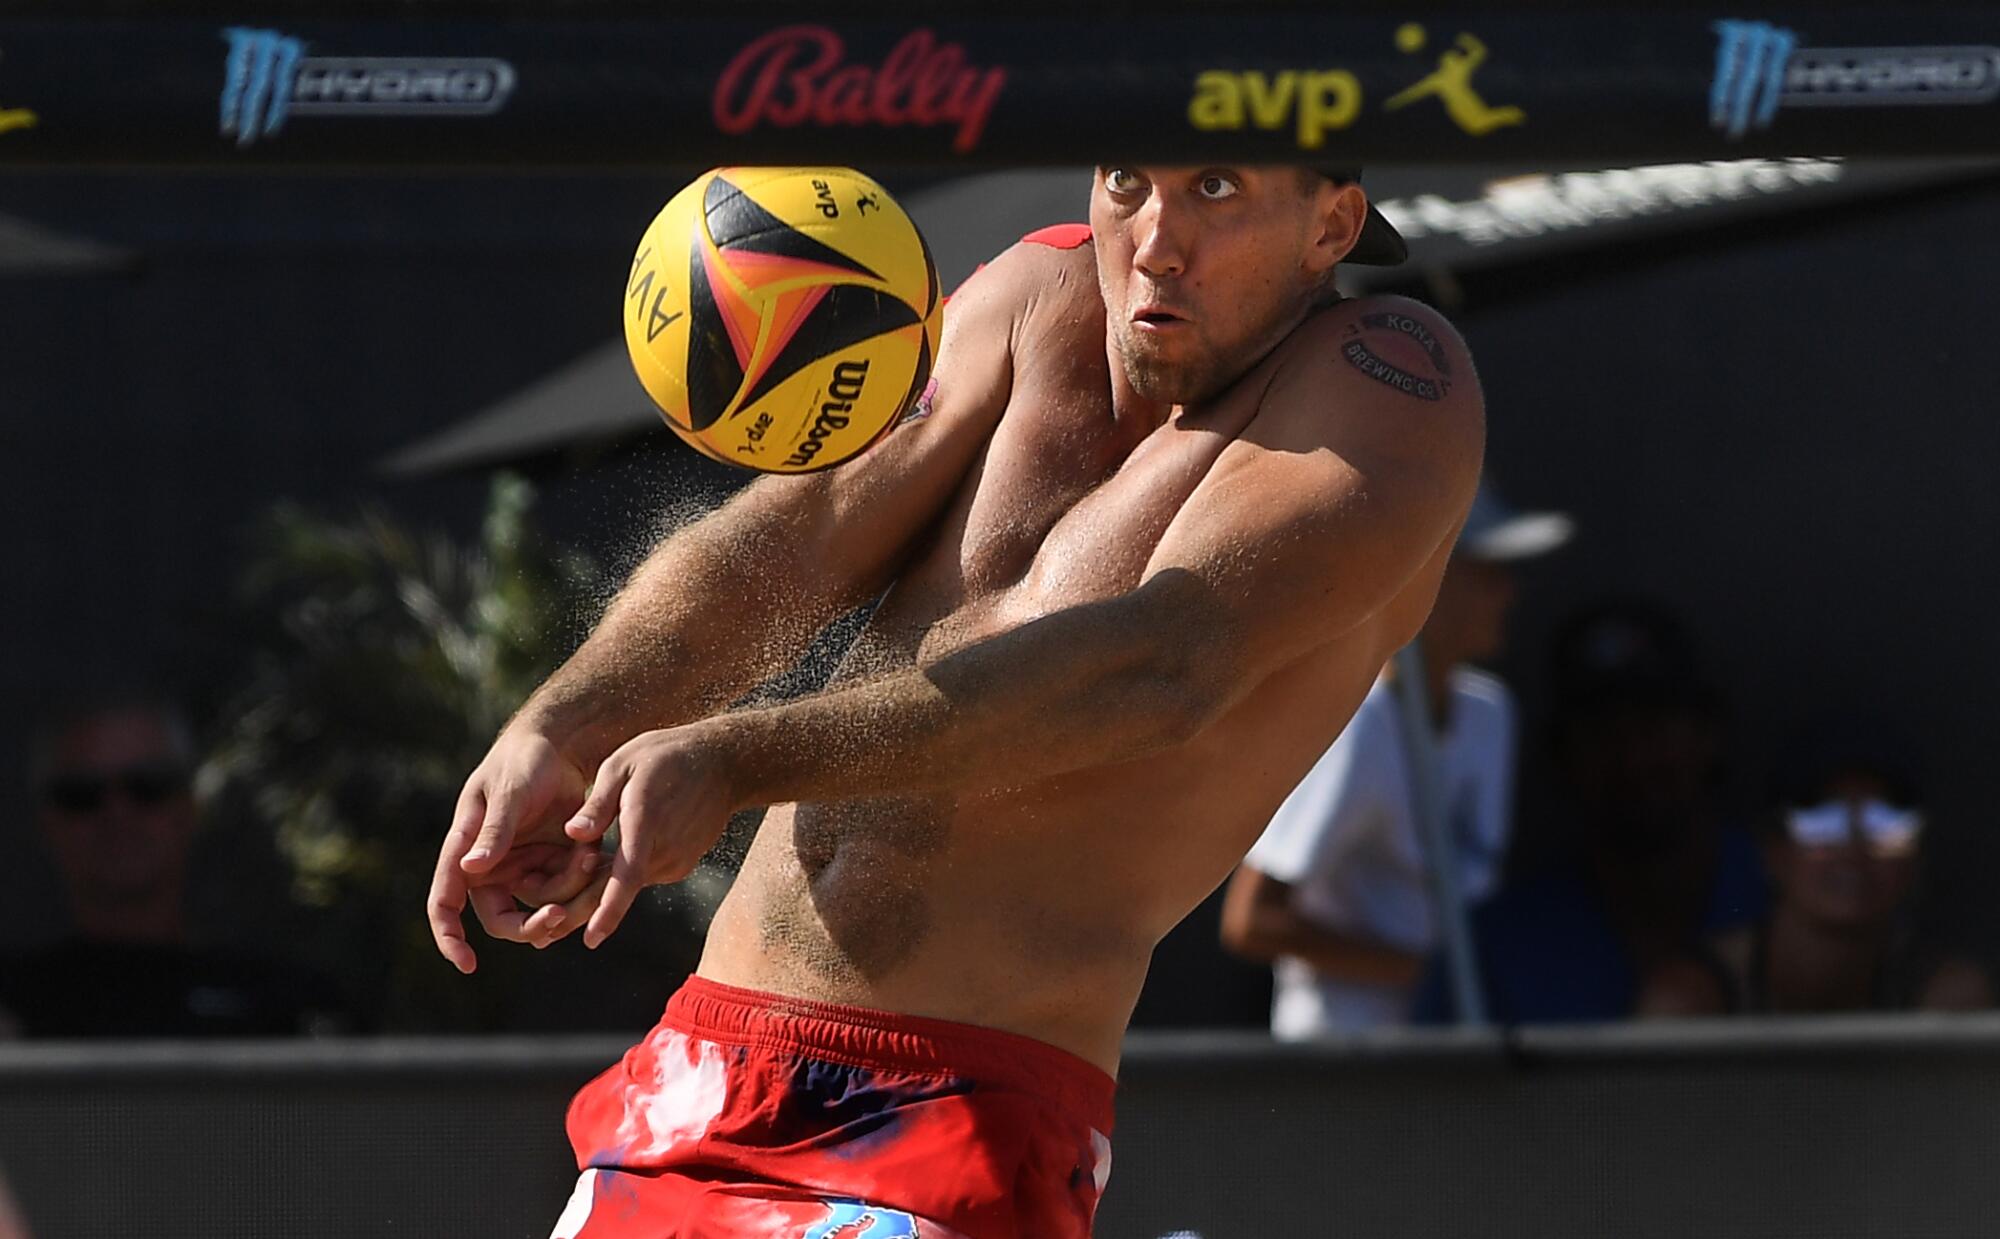 A man in red swim trunks hits a volleyball with both arms extended in front of him.